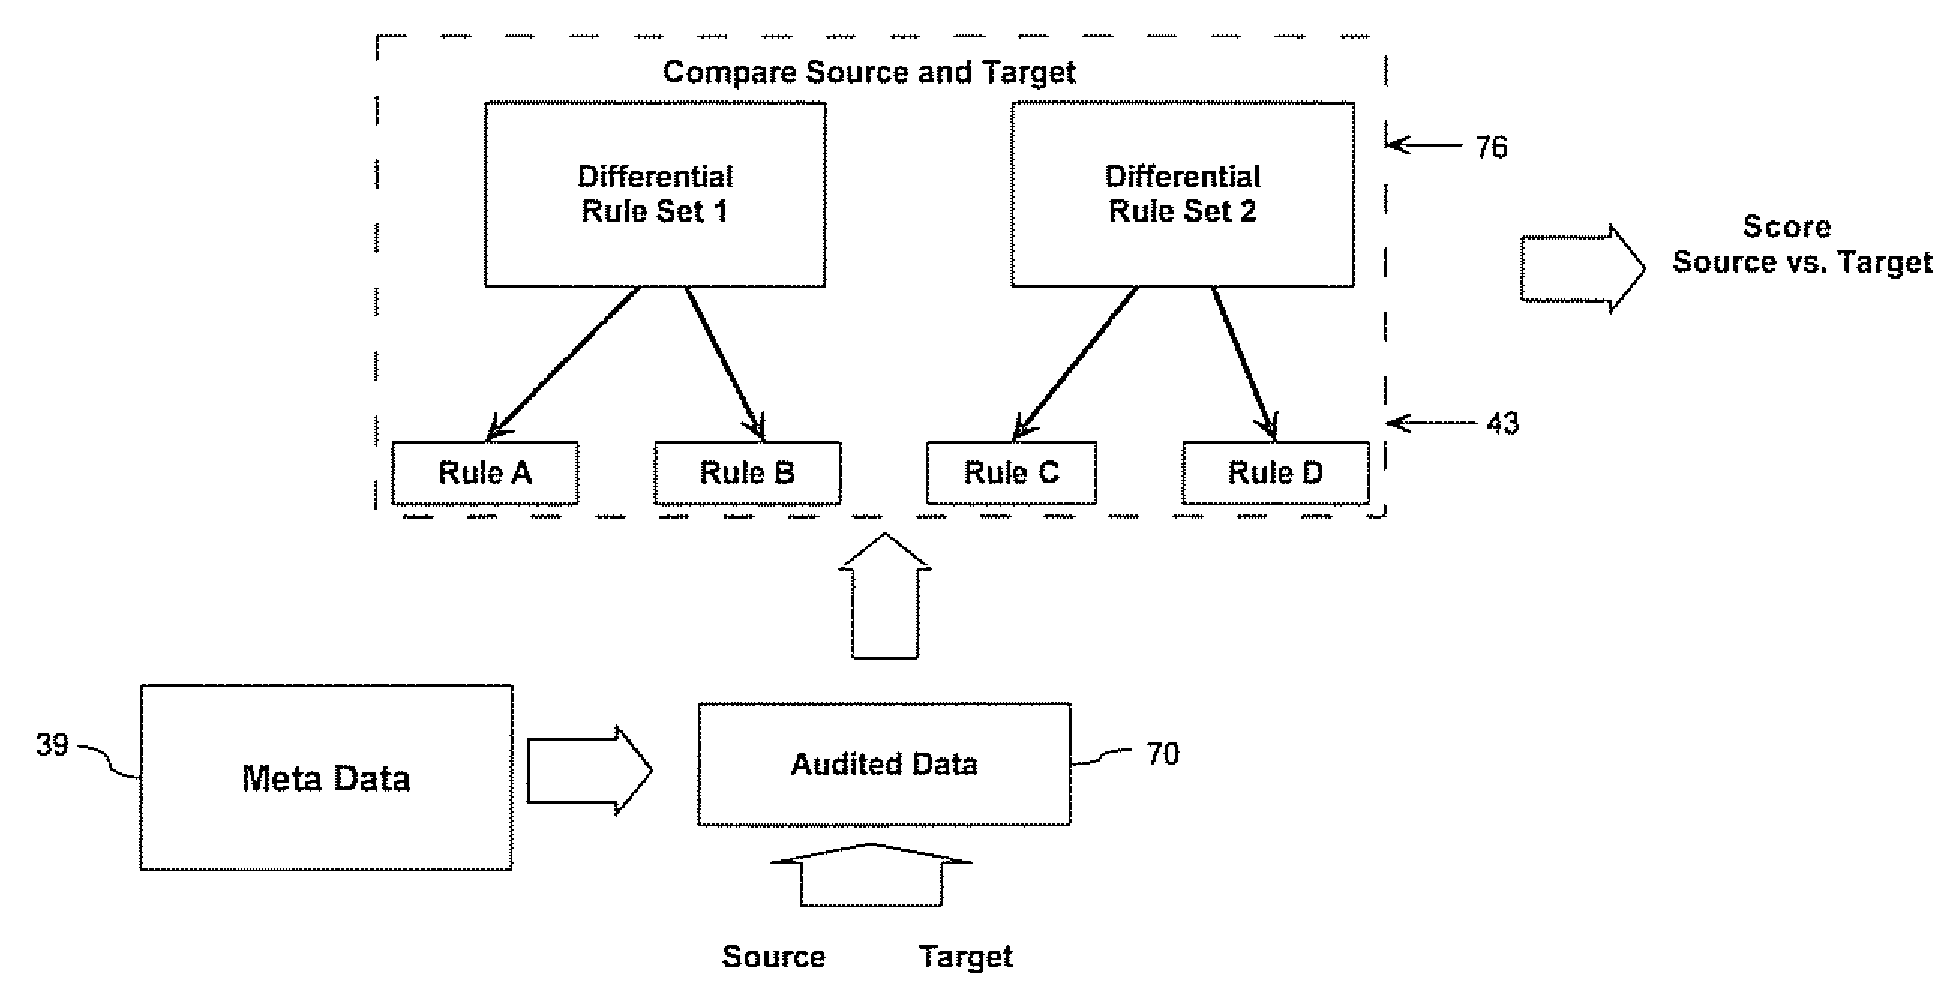 System and method for evaluating differences in parameters for computer systems using differential rule definitions